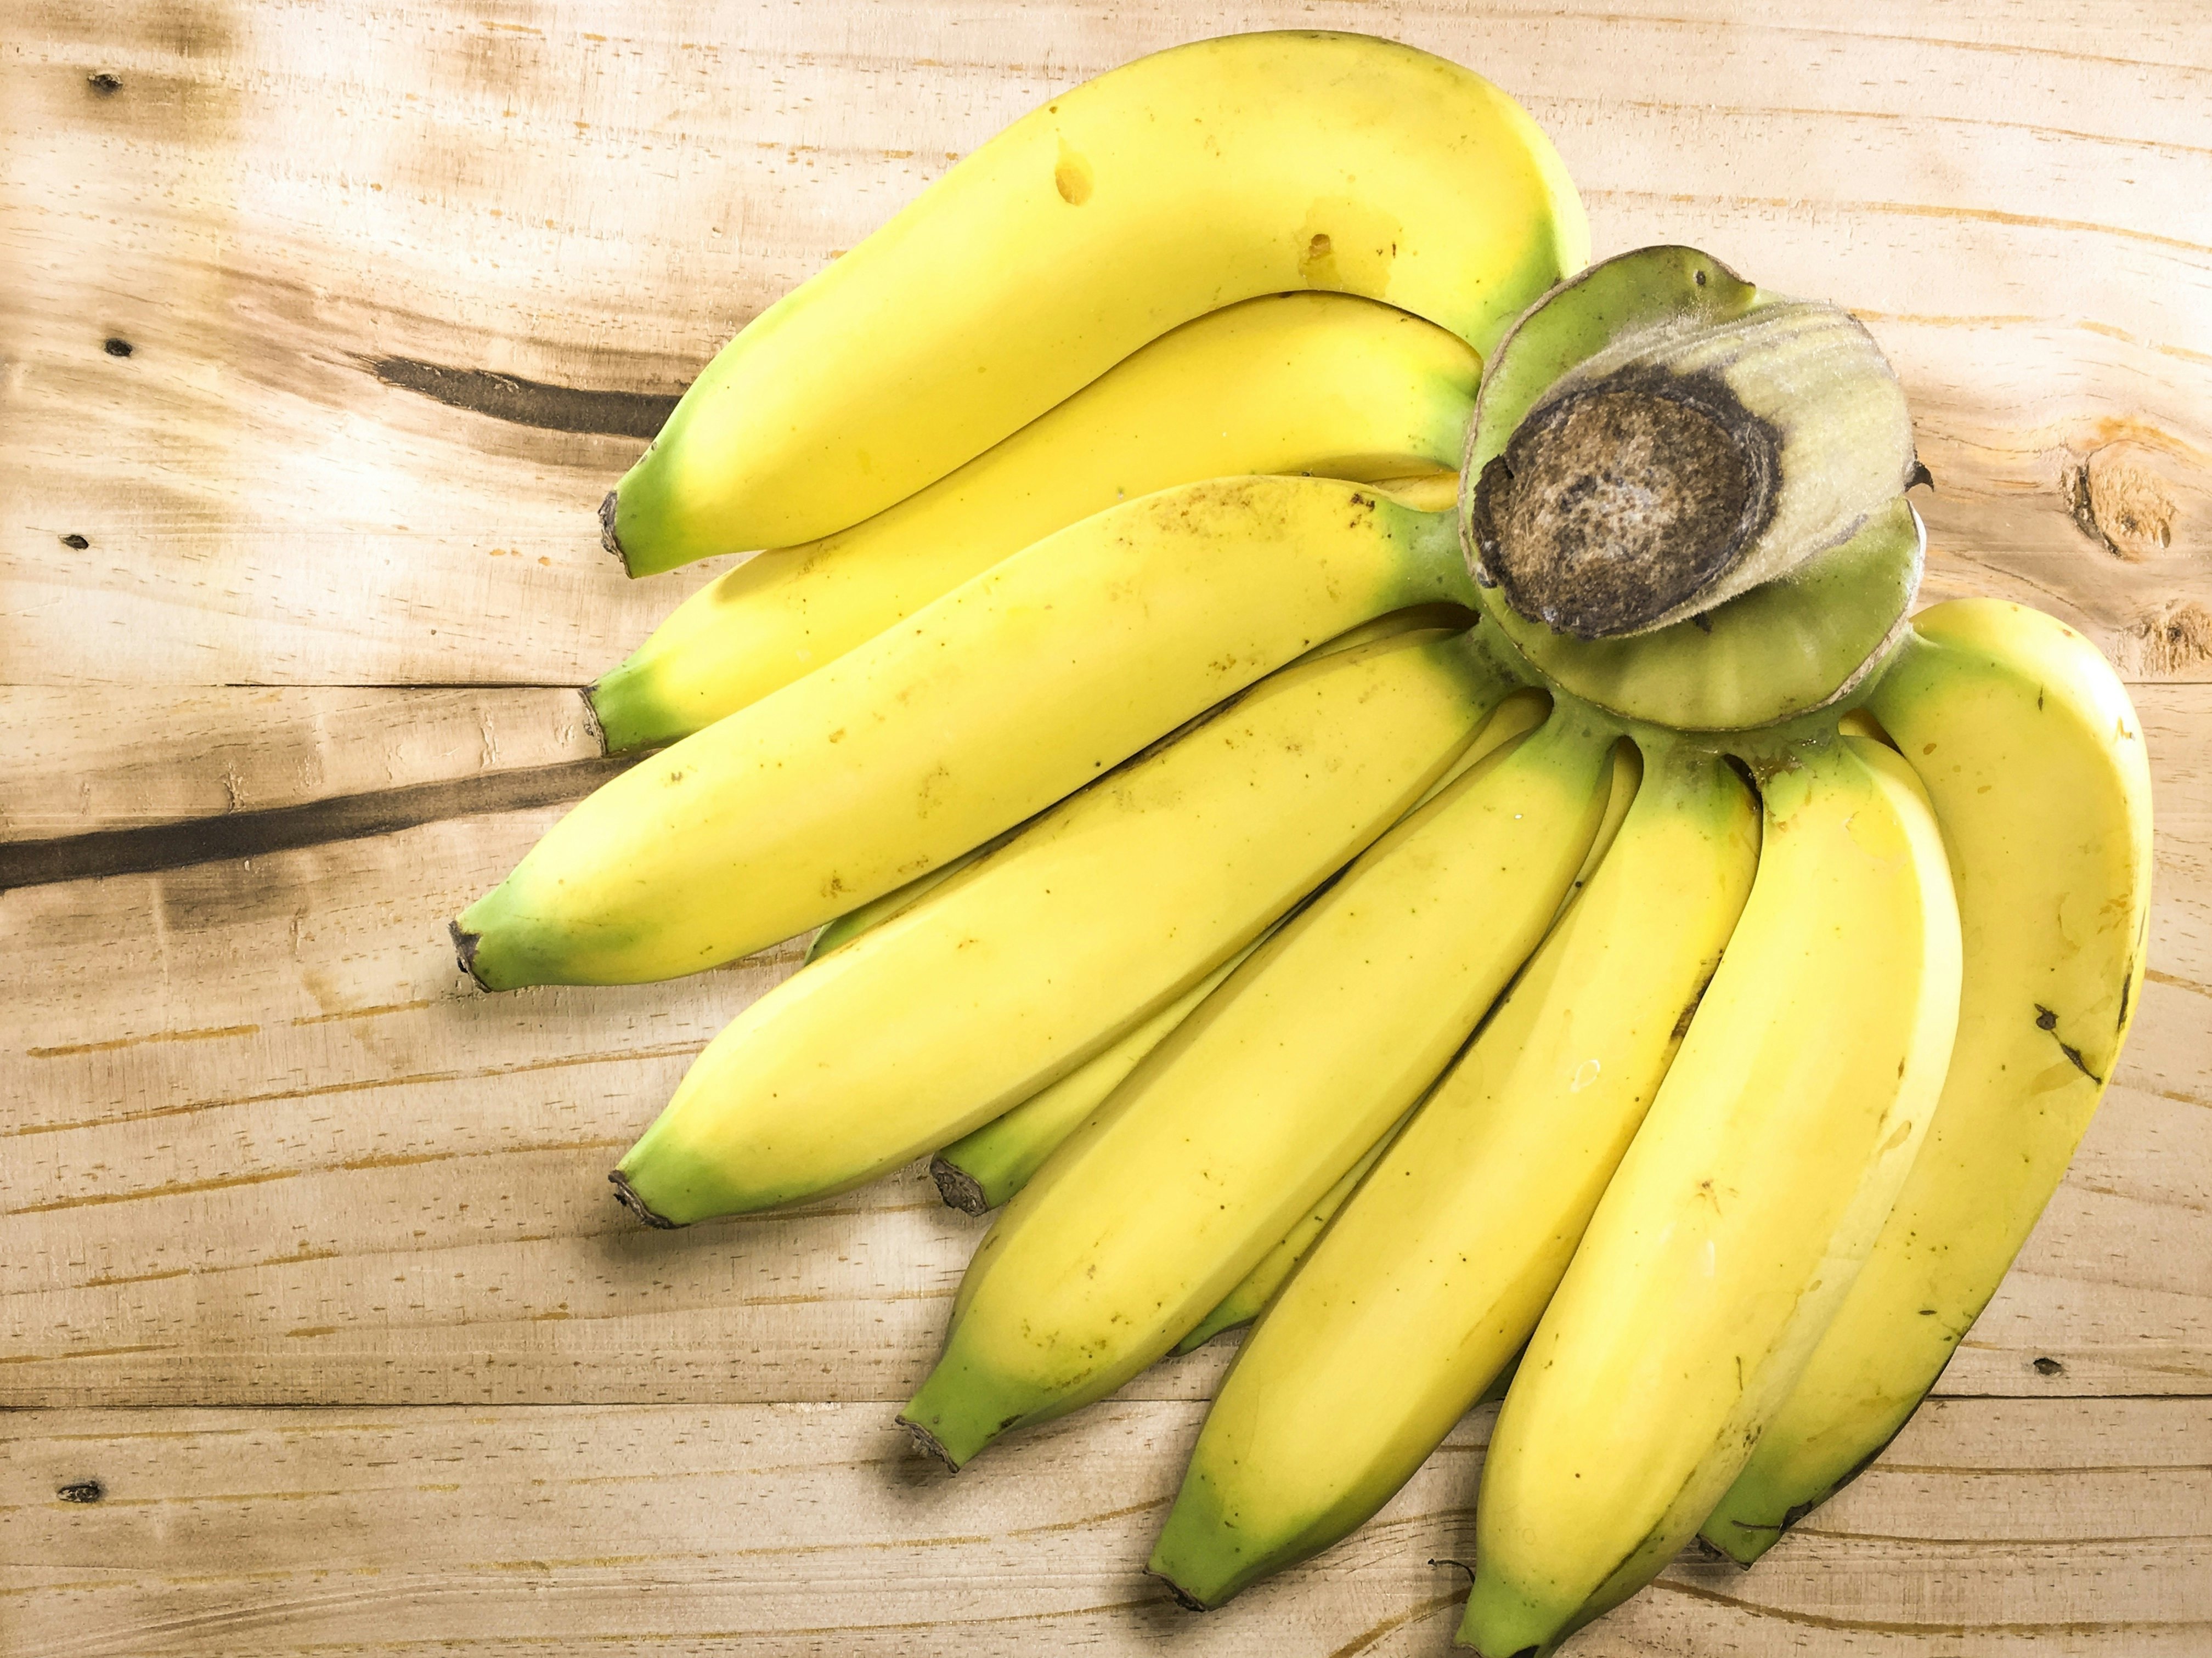 What is artificial banana flavor made of? A food neuroscientist